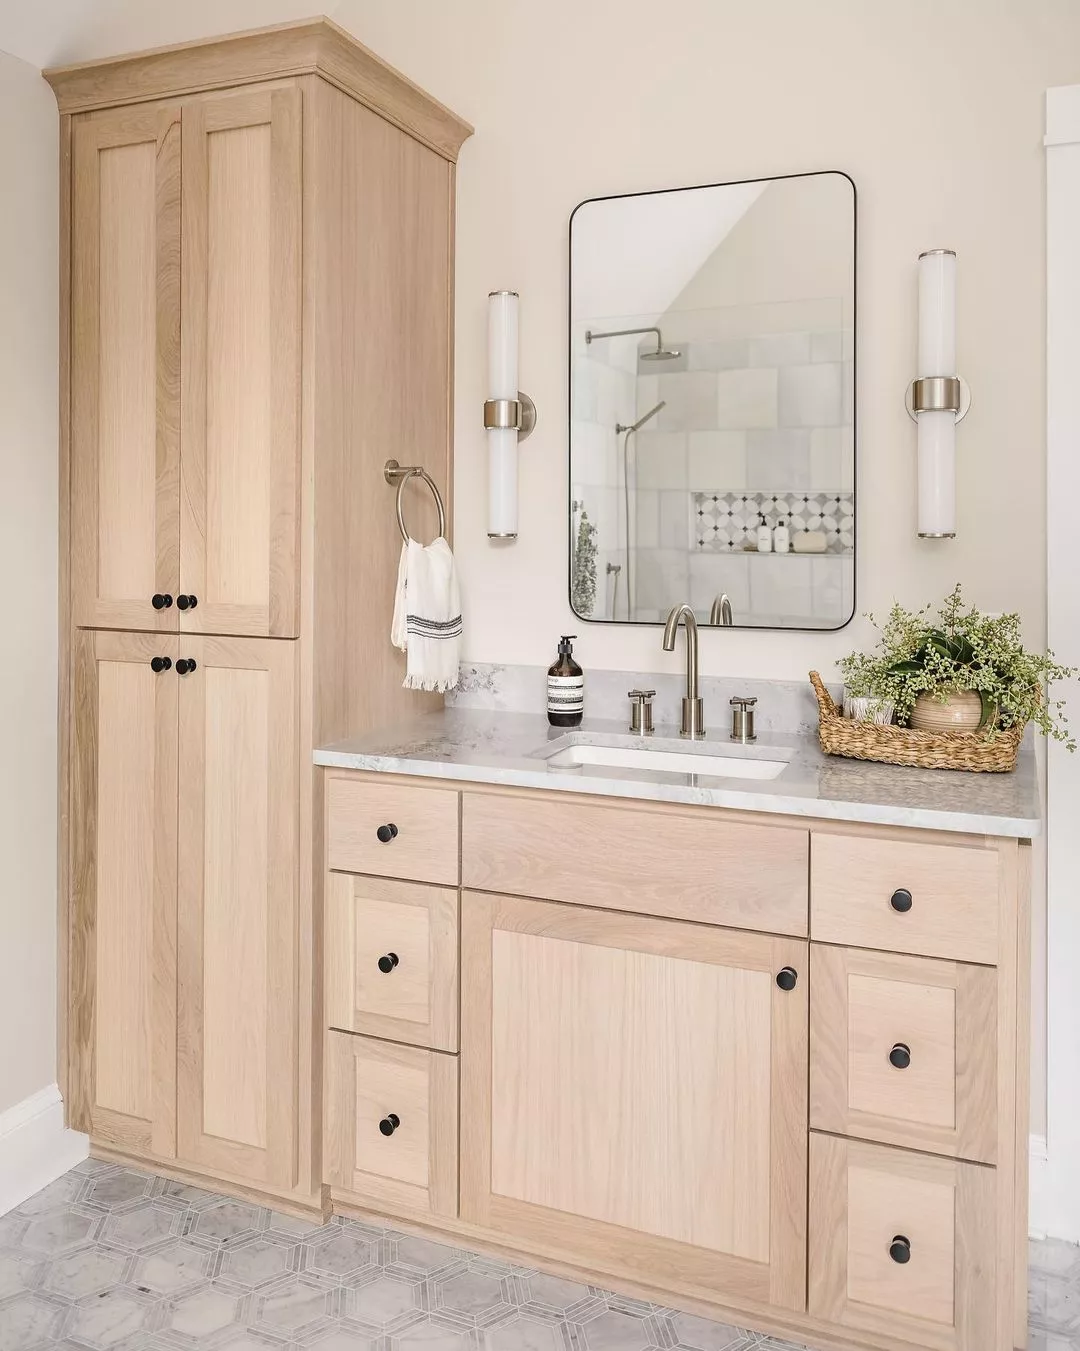 17 Bathroom Vanity Storage Ideas That Will Save Your Cabinets and Drawers